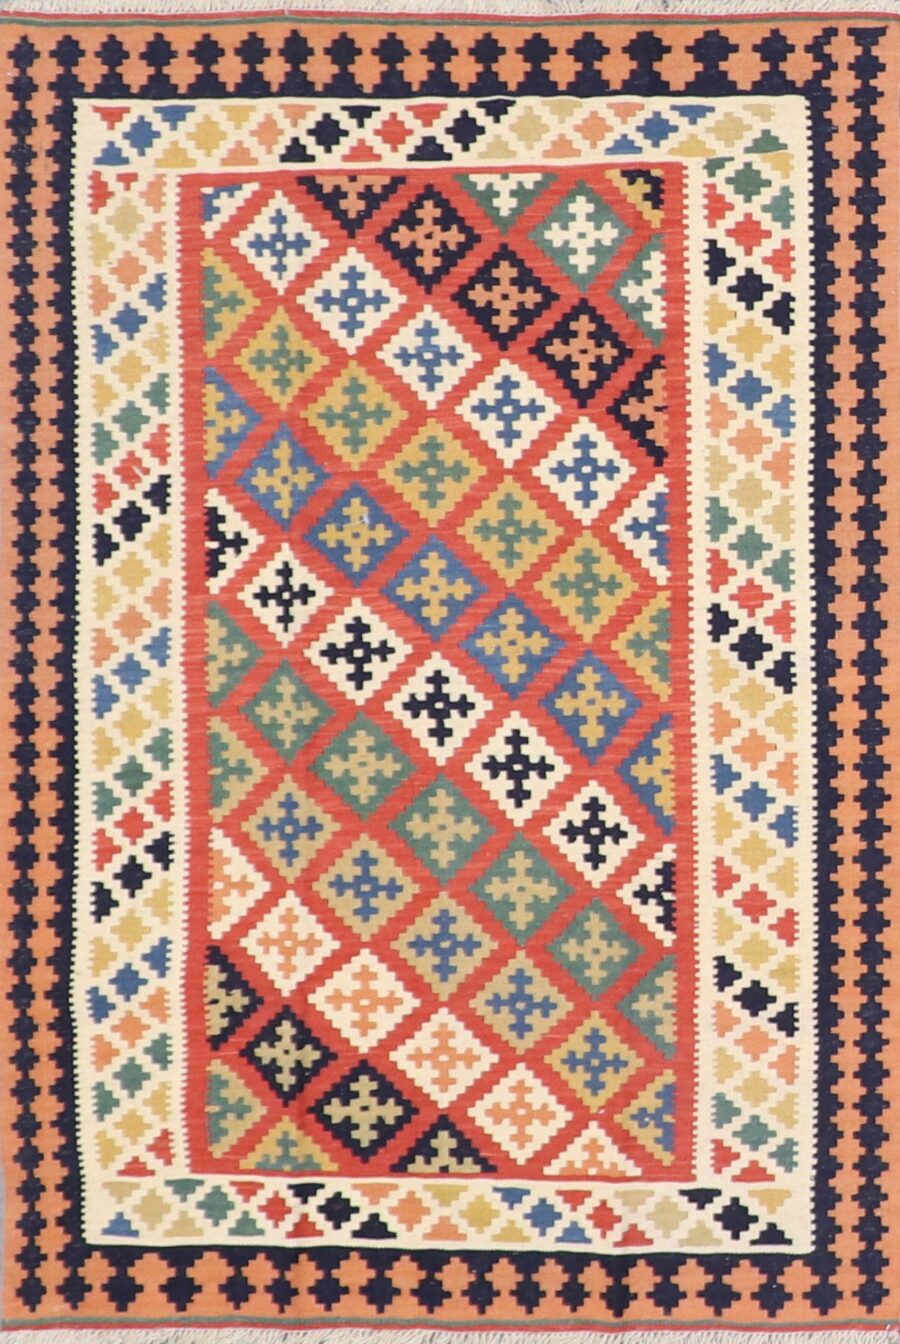 3’5”x4’11” Persian Kilim Multi-Colored Wool Hand-Knotted Rug - Direct Rug Import | Rugs in Chicago, Indiana,South Bend,Granger